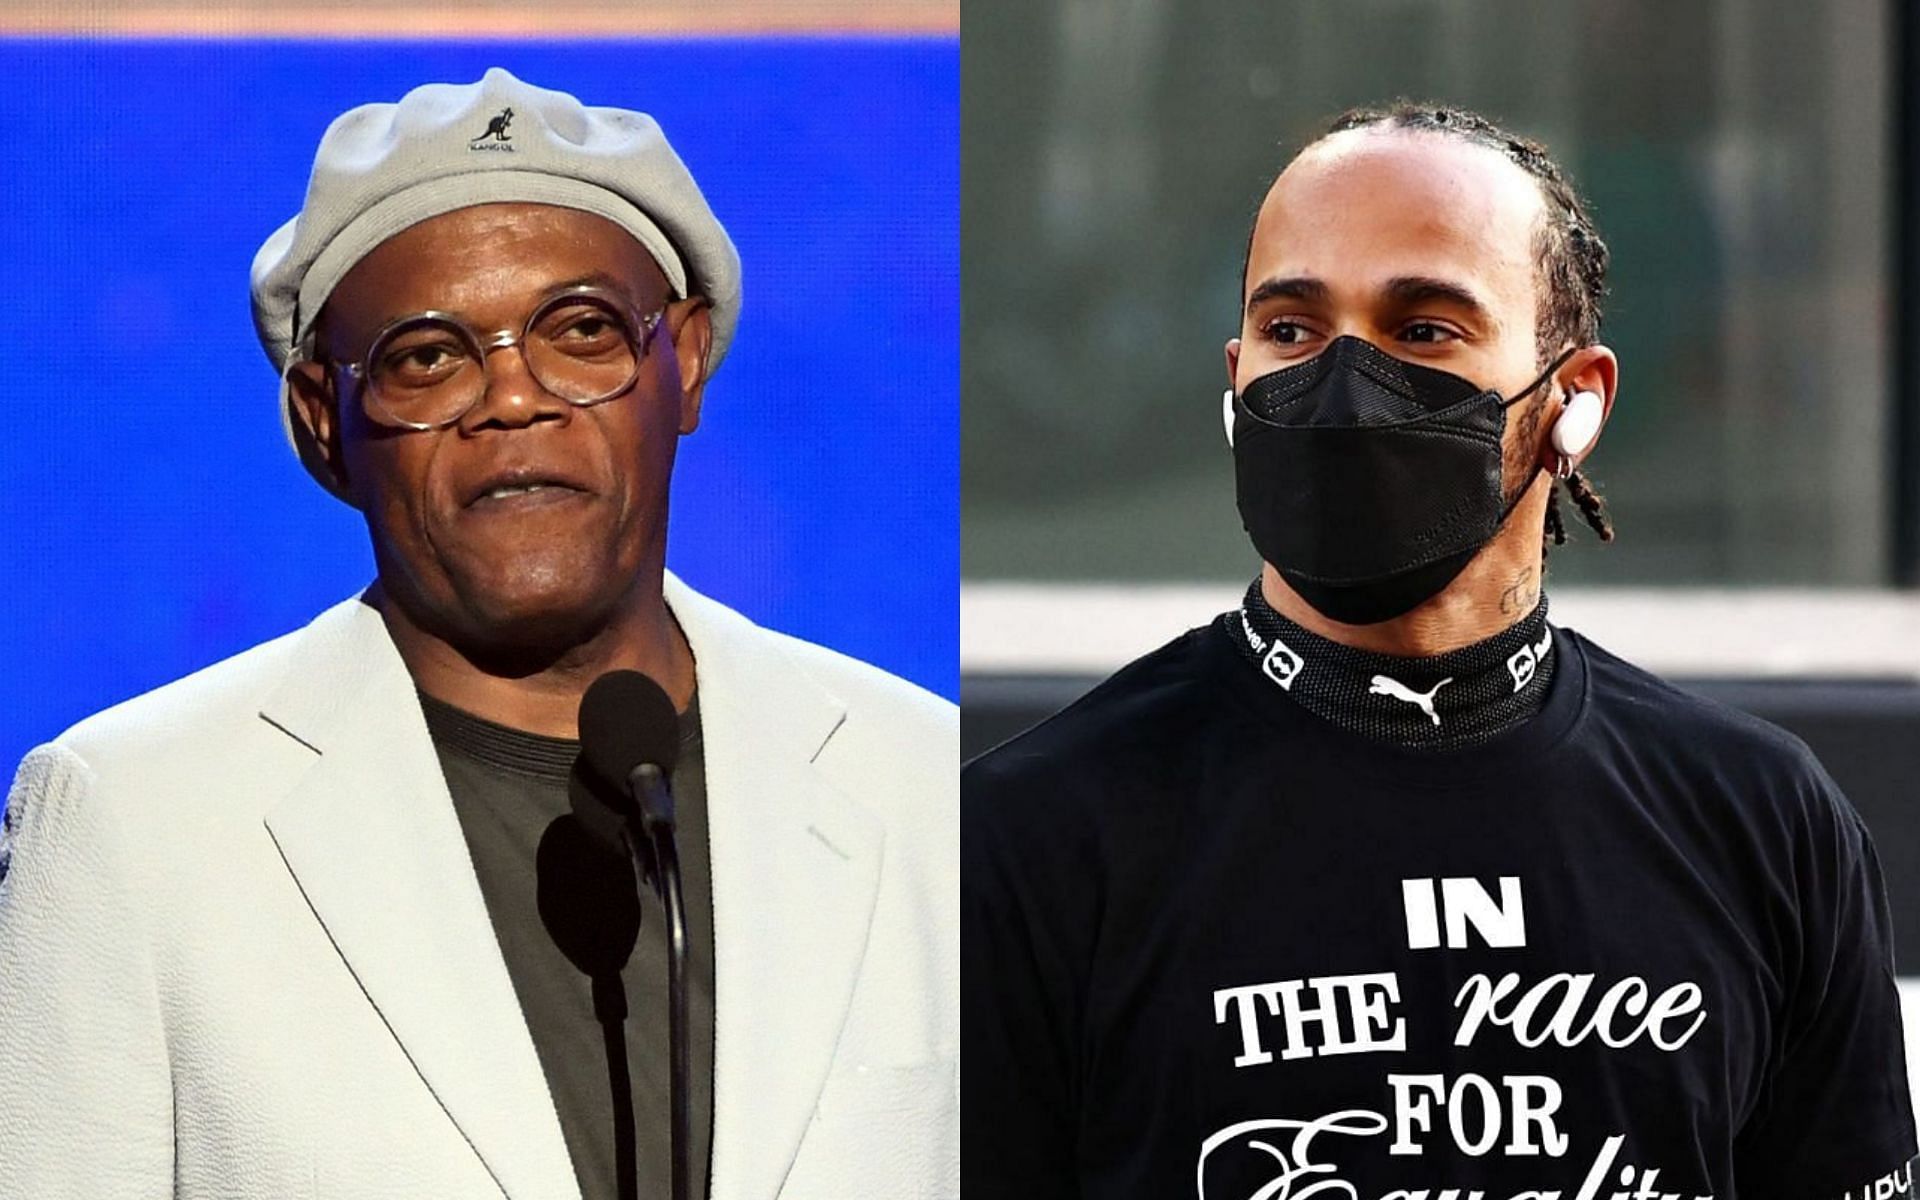 Samuel L. Jackson (left) feels Lewis Hamilton (right) was &quot;robbed&quot; of his eighth F1 world championship